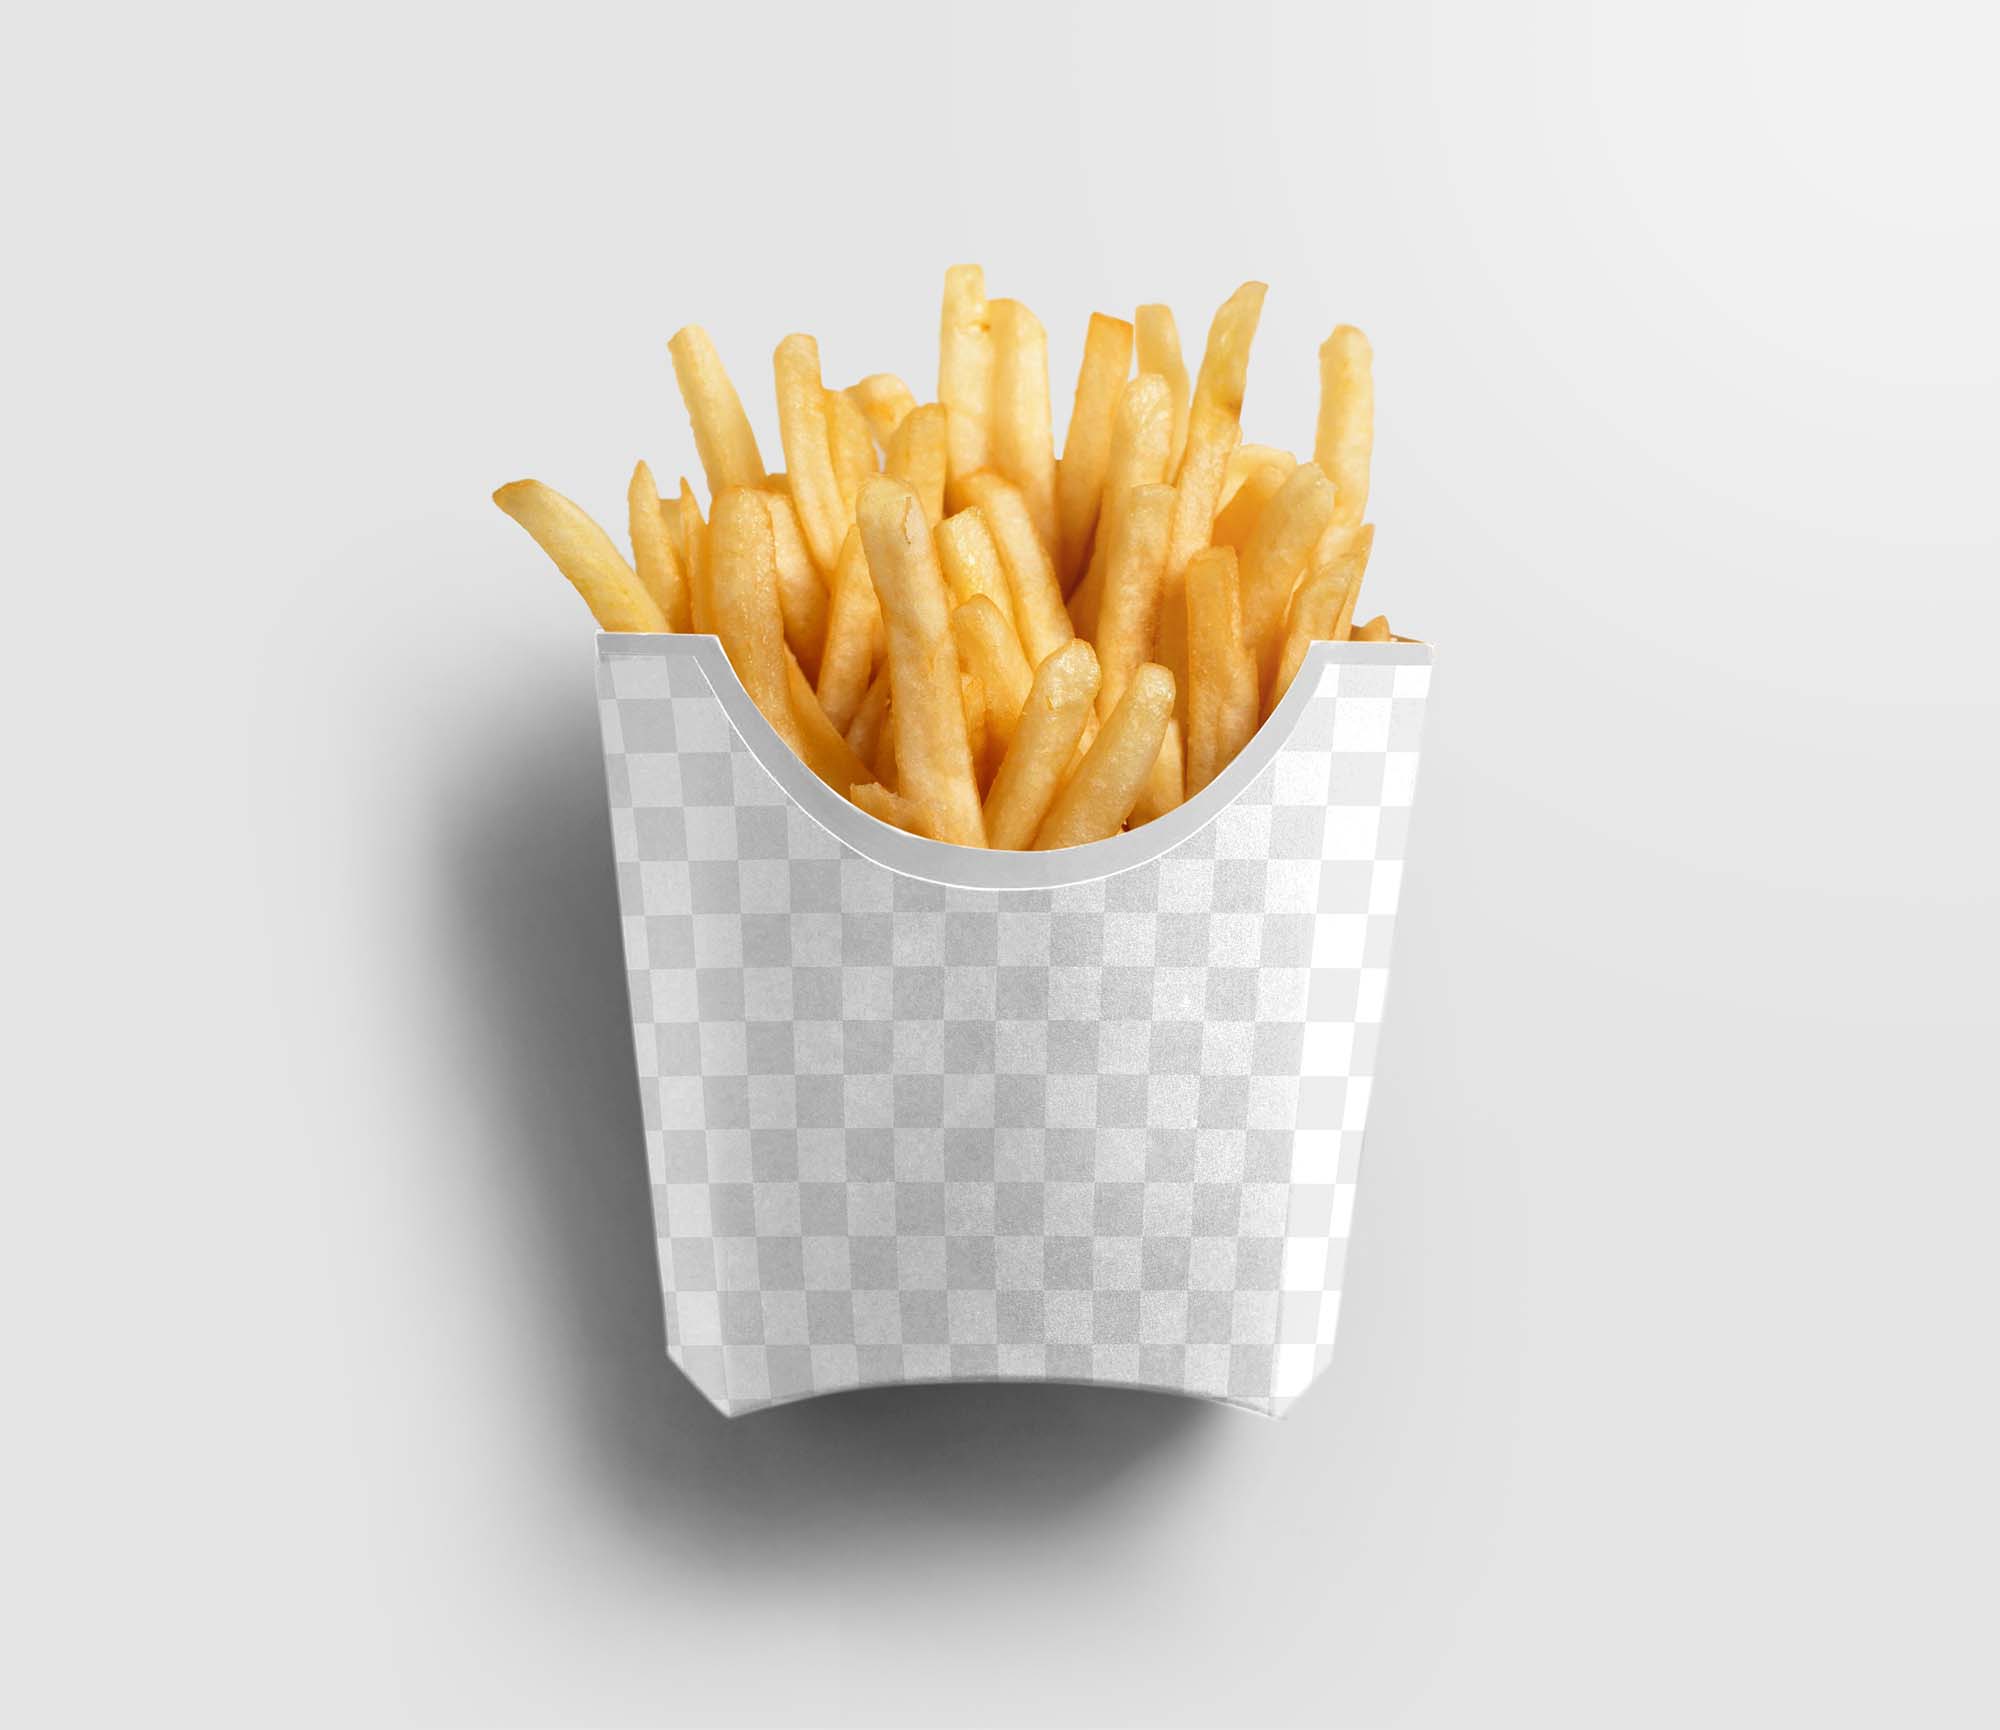 Kraft Paper Small Size French Fries Packaging Mockup - Half Side View -  Free Download Images High Quality PNG, JPG